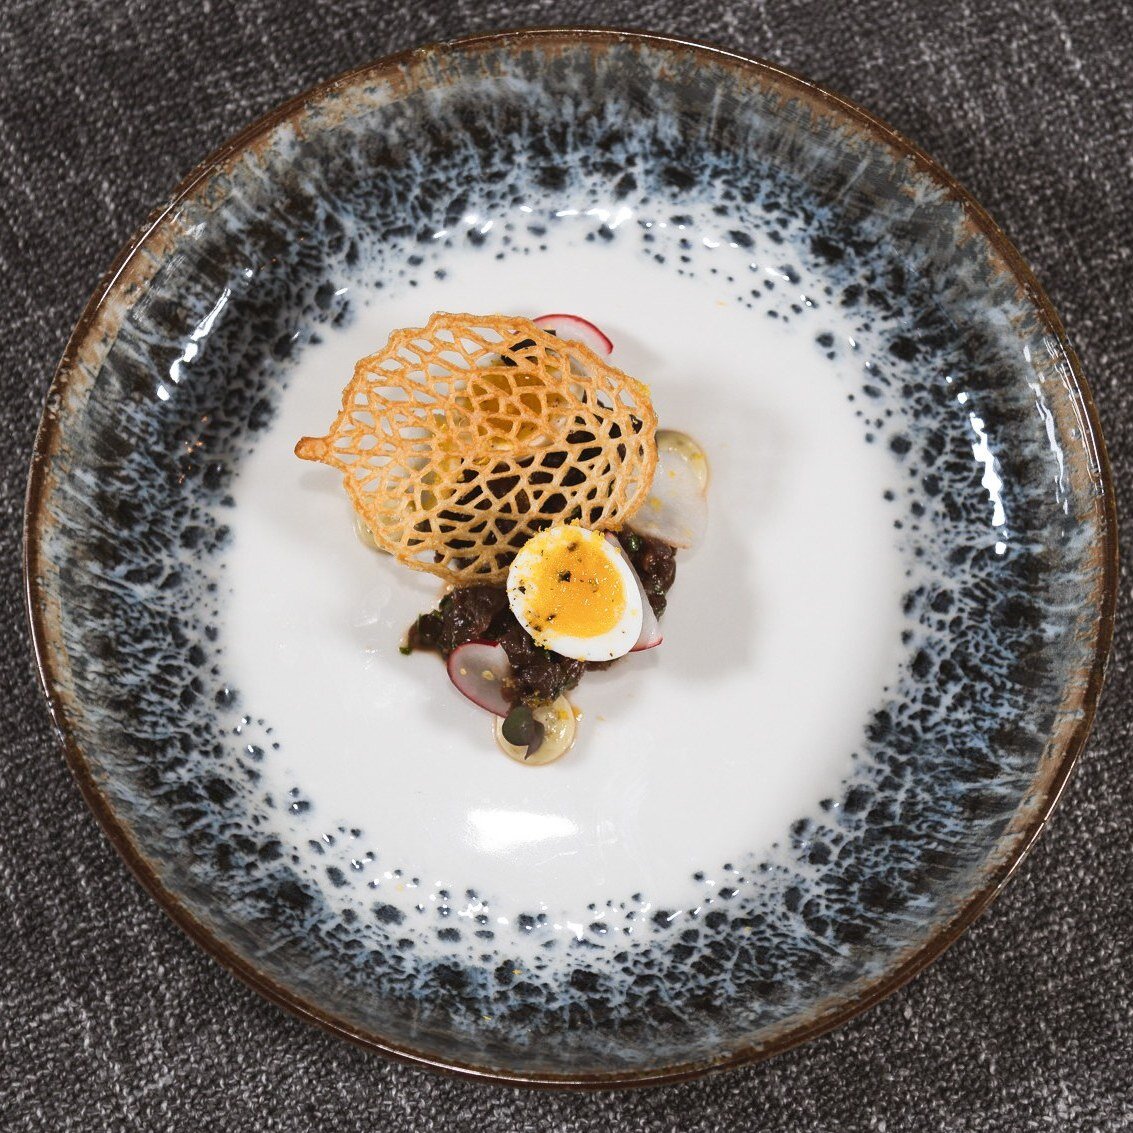 The first day of December is here. The perfect time to try our Winter Menu. ❄️

Venison Tartar,
Caper Emulsion, 
Grilled Sourdough.

➡ Now taking bookings for Christmas on our website.
➡ Get in touch today for a modern food experience on Howth's West